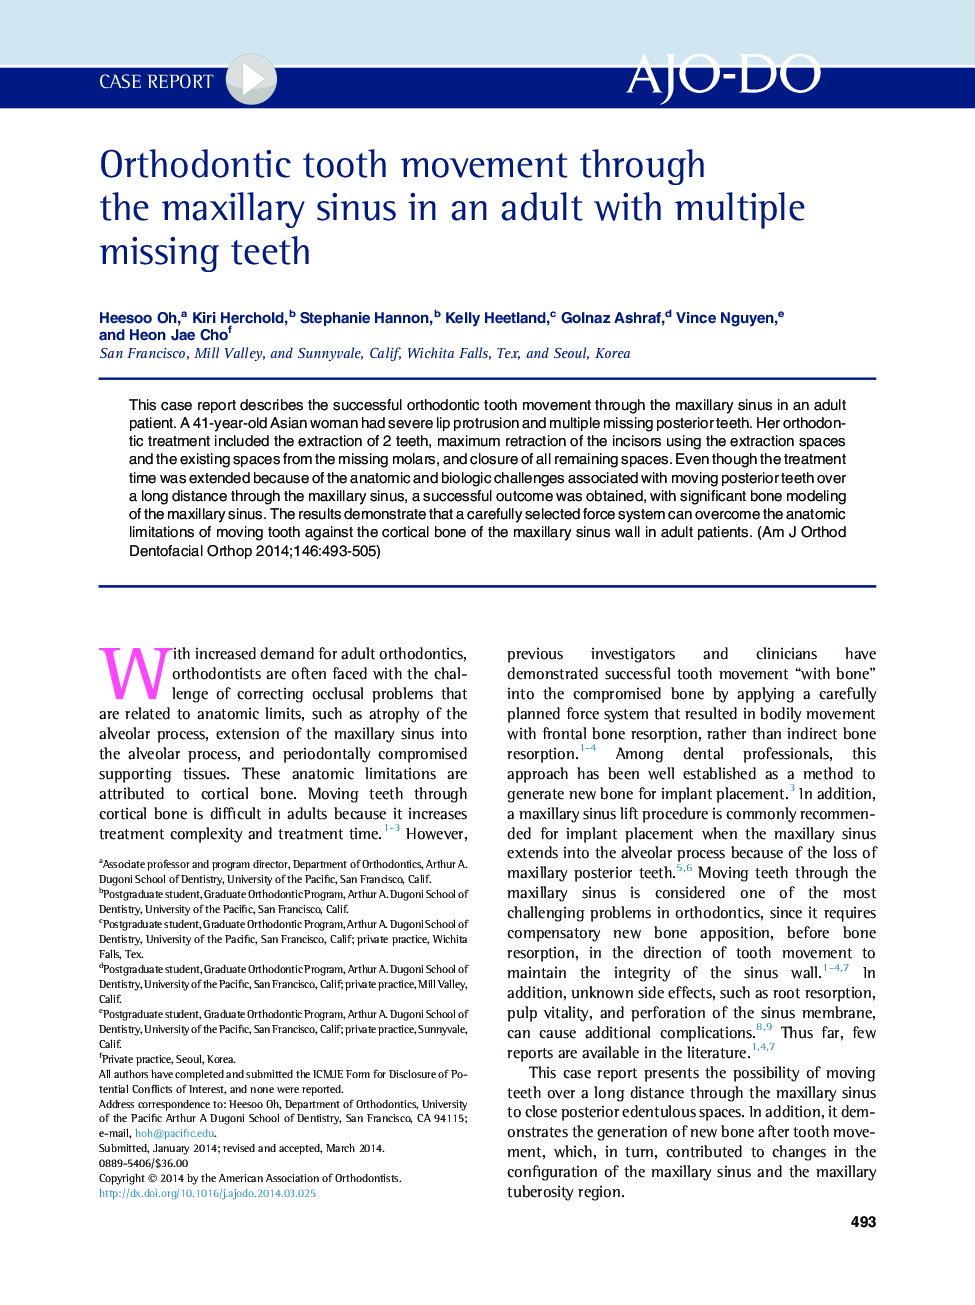 Orthodontic tooth movement through the maxillary sinus in an adult with multiple missing teeth 